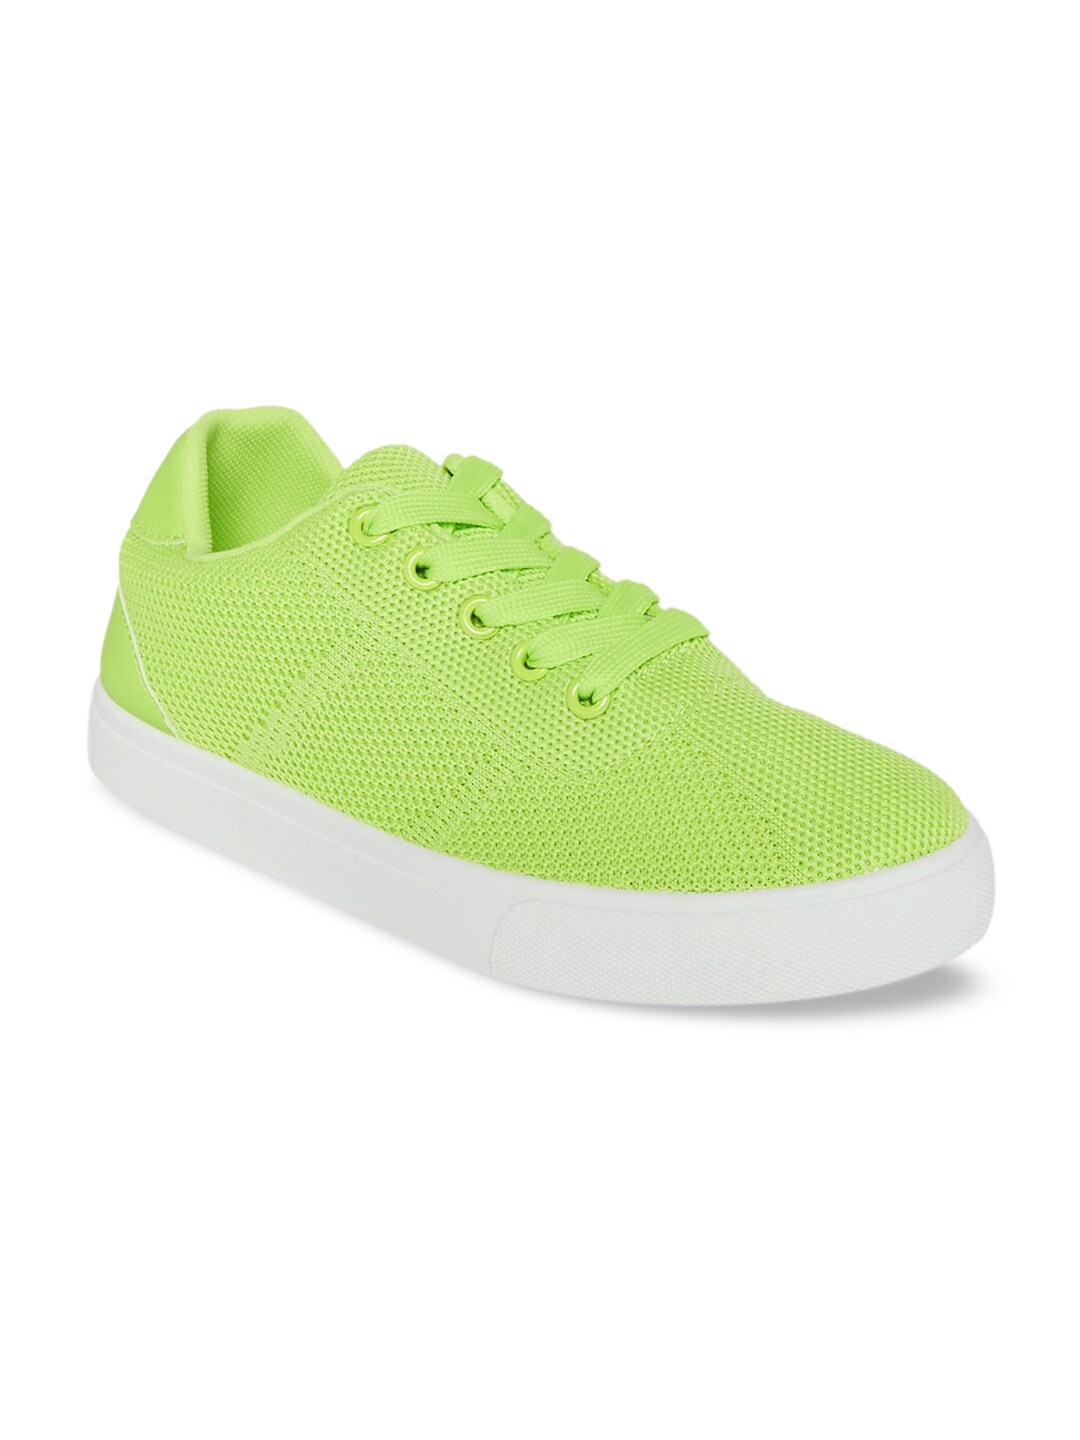 Forever Glam by Pantaloons Women Lime Green Woven Design Sneakers Price in India